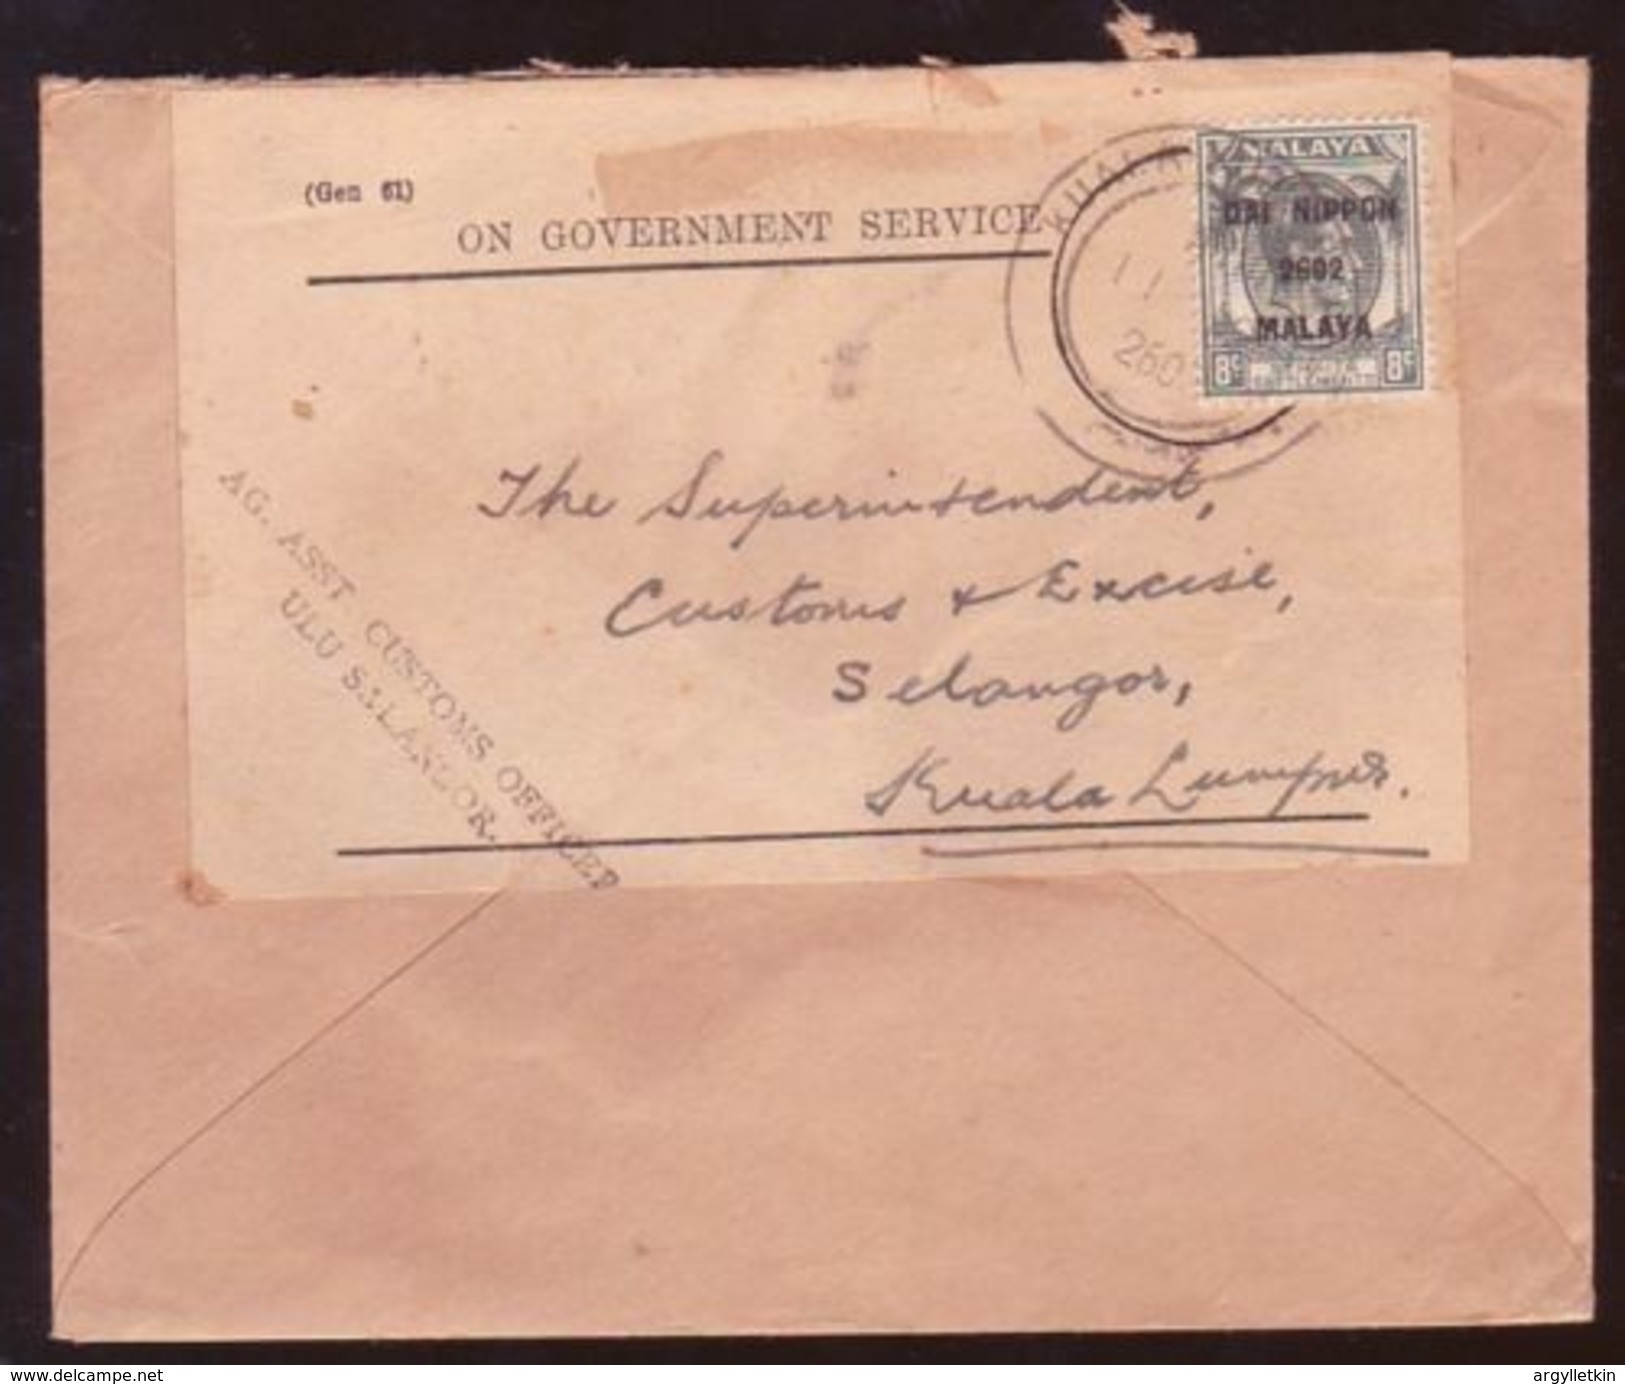 MALAYA/JAPANESE OCCUPATION/SELANGOR 1942 - Occupazione Giapponese